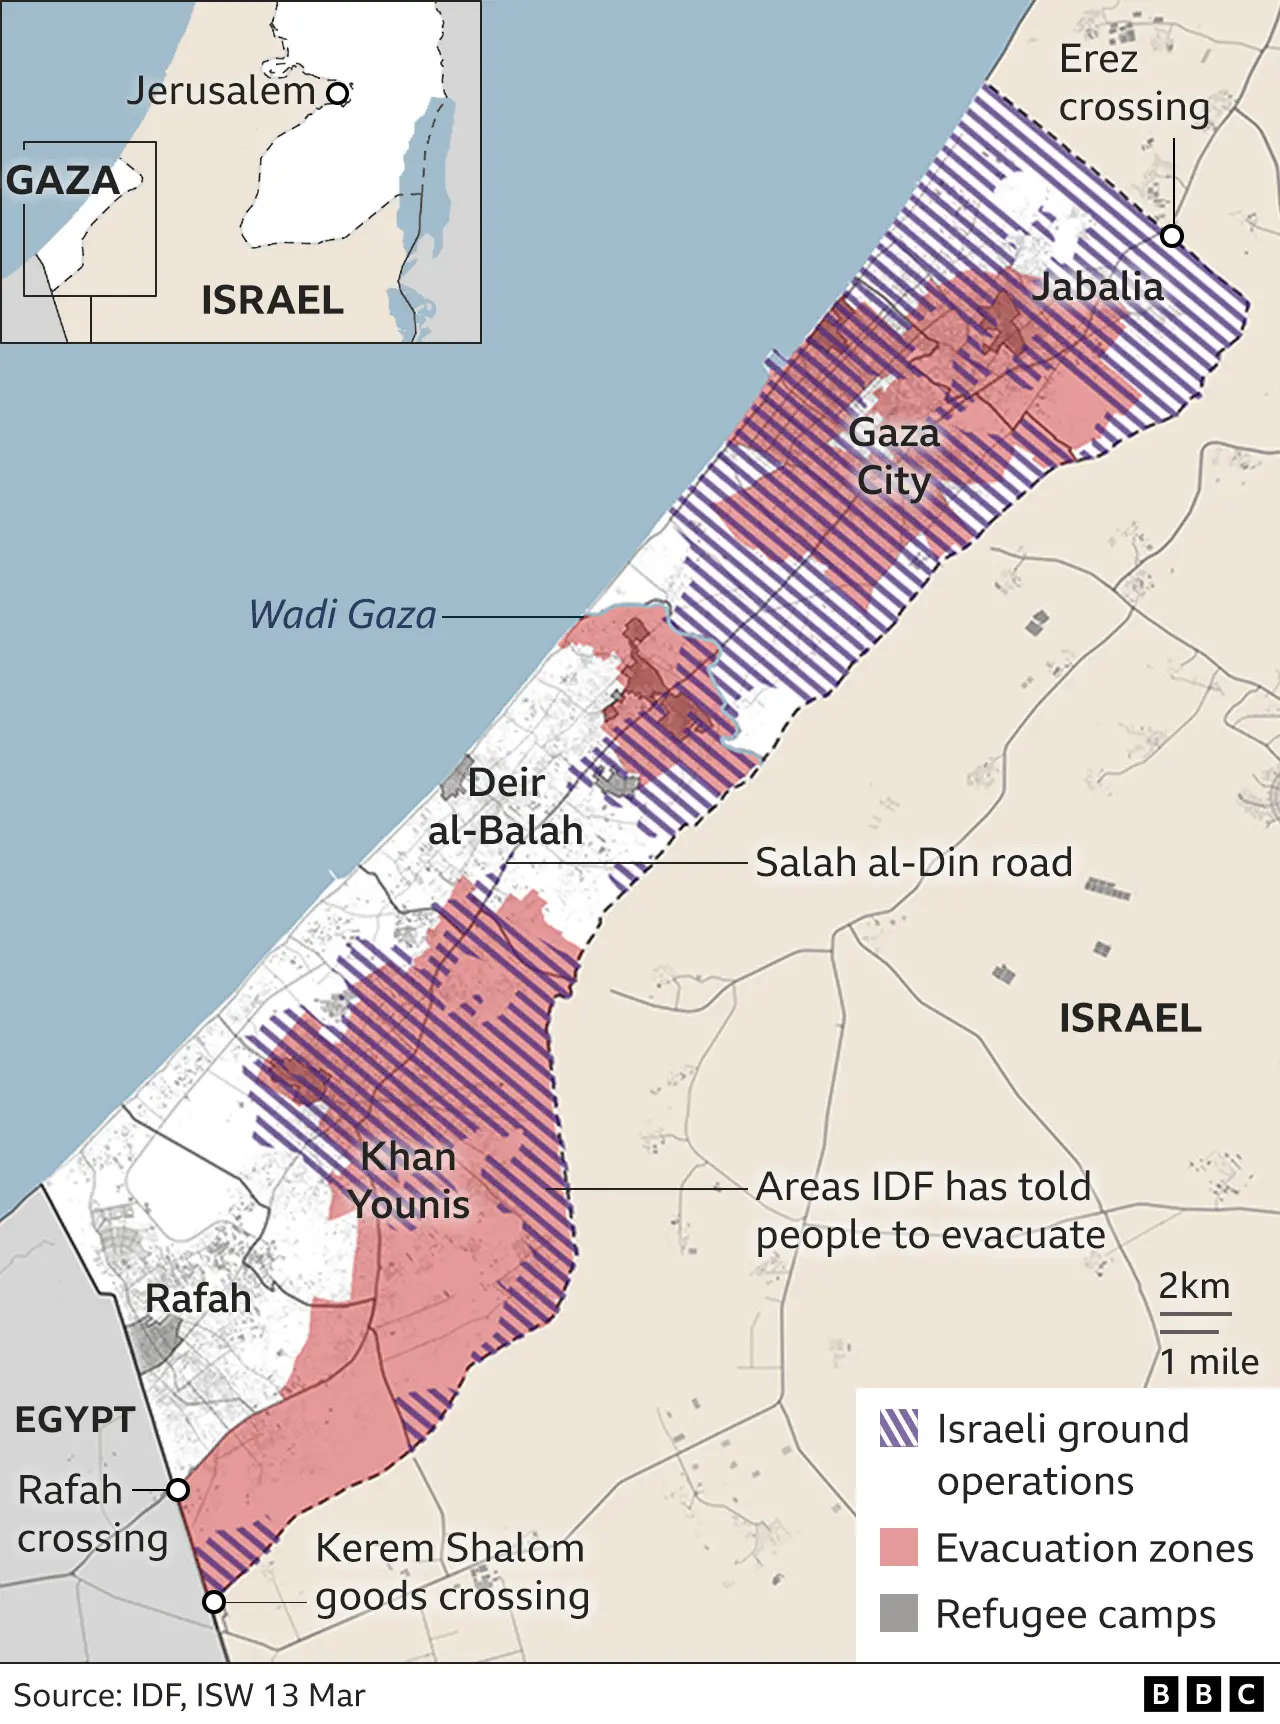 https://ichef.bbci.co.uk/news/1024/cpsprodpb/17056/production/_132949249_gaza_evacuation_zones_and_ground_ops_060324_640-nc-2x-nc.png.webp